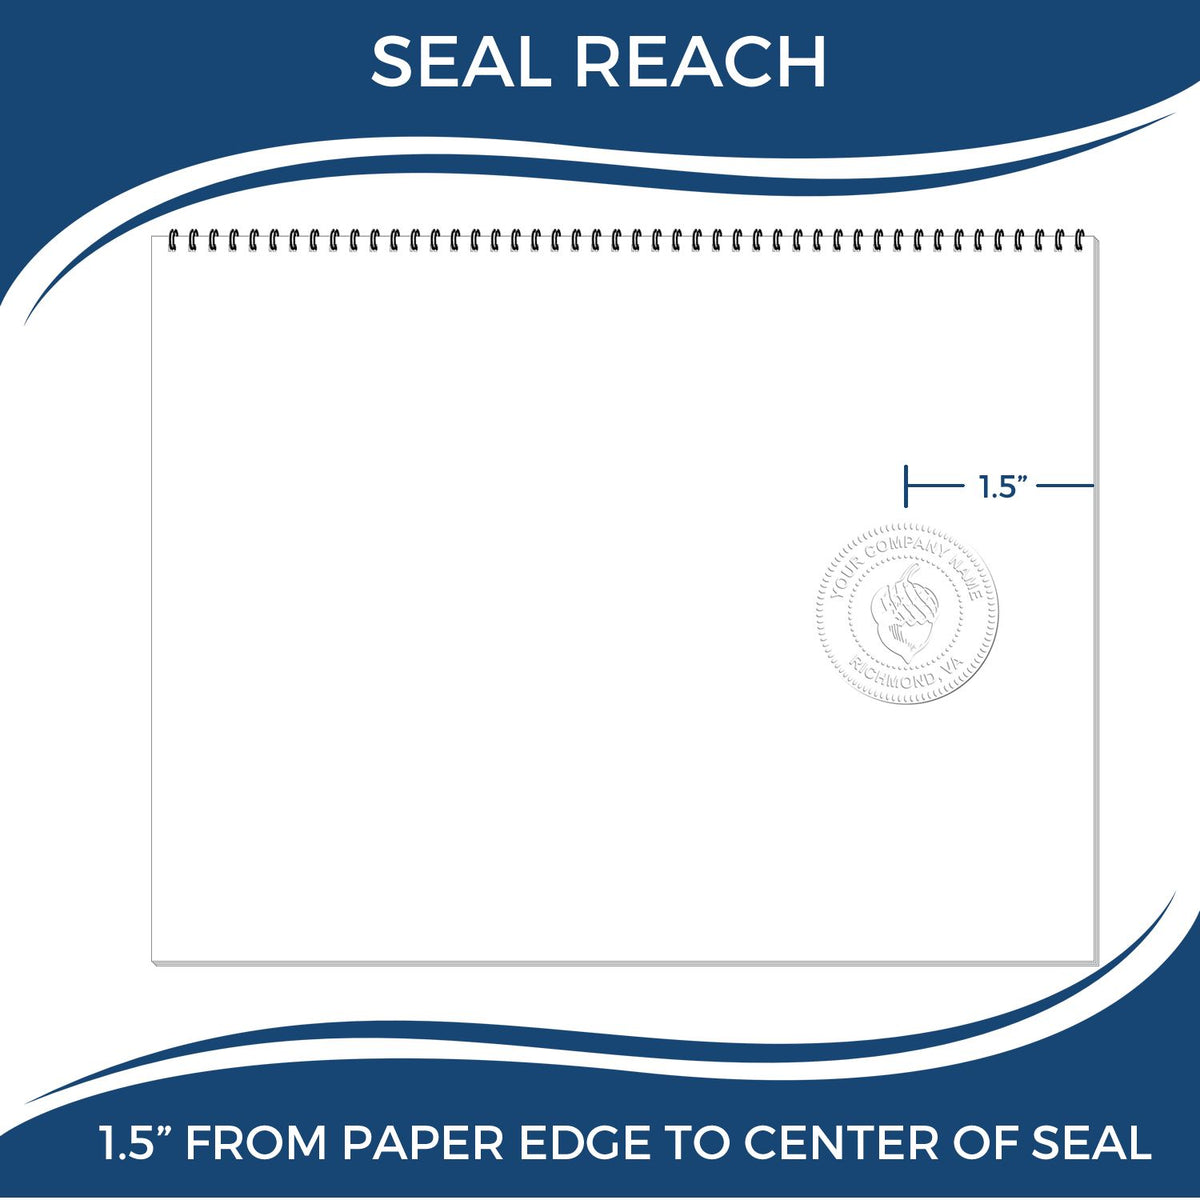 An infographic showing the seal reach which is represented by a ruler and a miniature seal image of the Gift Georgia Engineer Seal